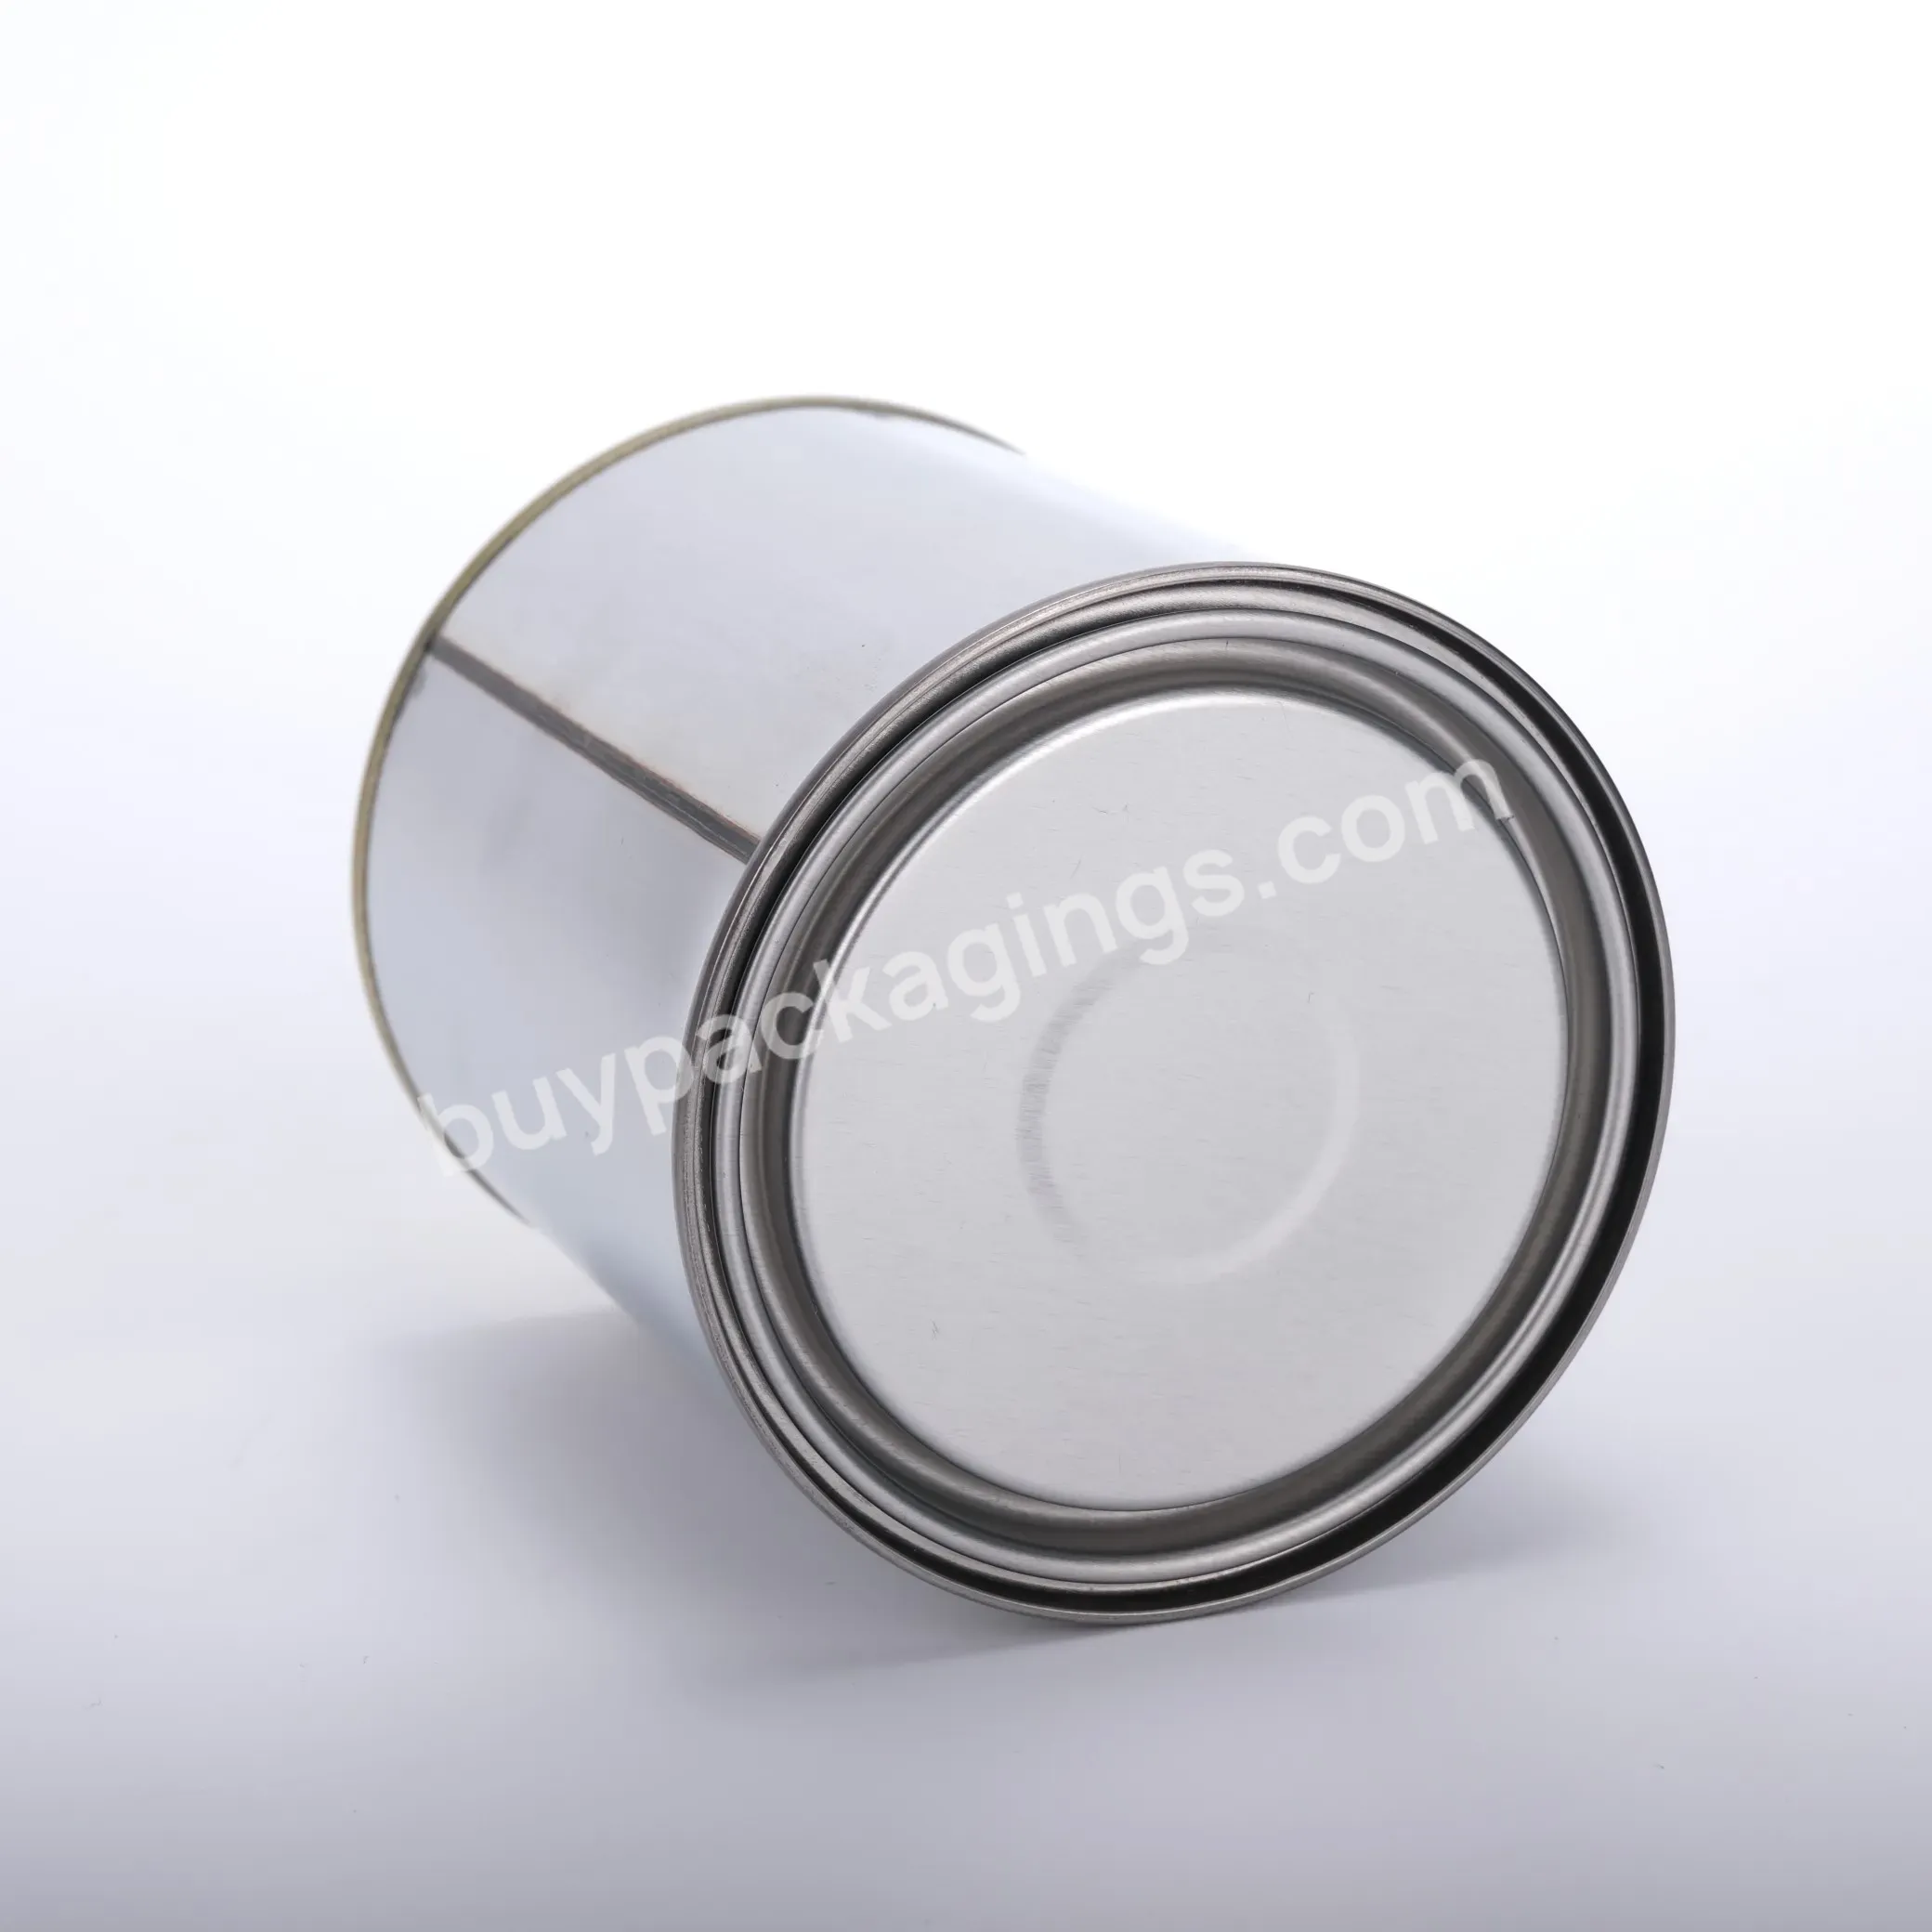 370 Ml Empty Candles Glue Paint Tinplate Metal Round Tin Can